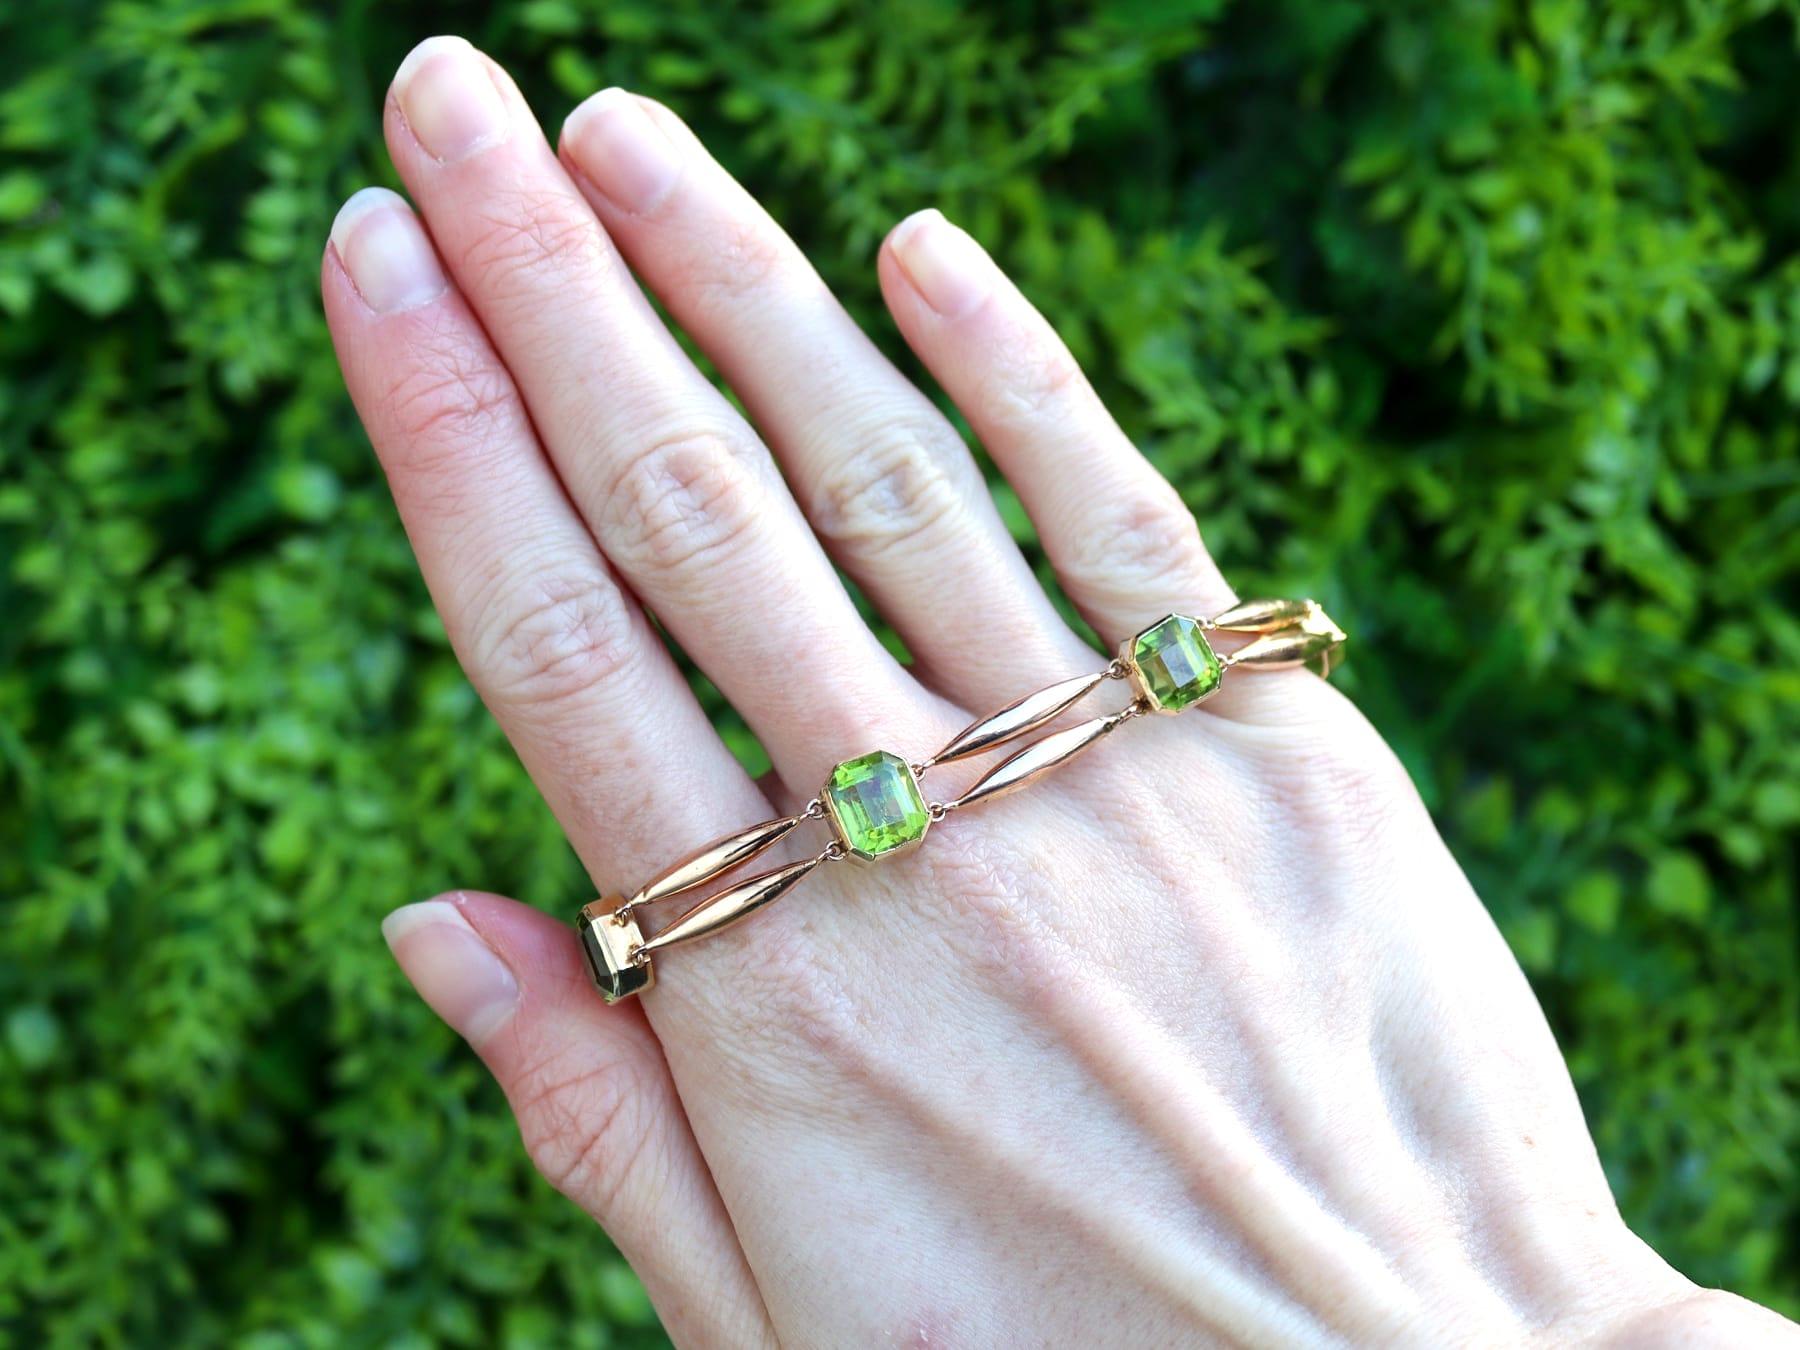 A stunning, fine and impressive 17.50 carat peridot and 15 karat rose gold bracelet; part of our diverse antique jewelry and estate jewelry collections.

This stunning, fine and impressive antique bracelet has been crafted in 15k rose gold.

The